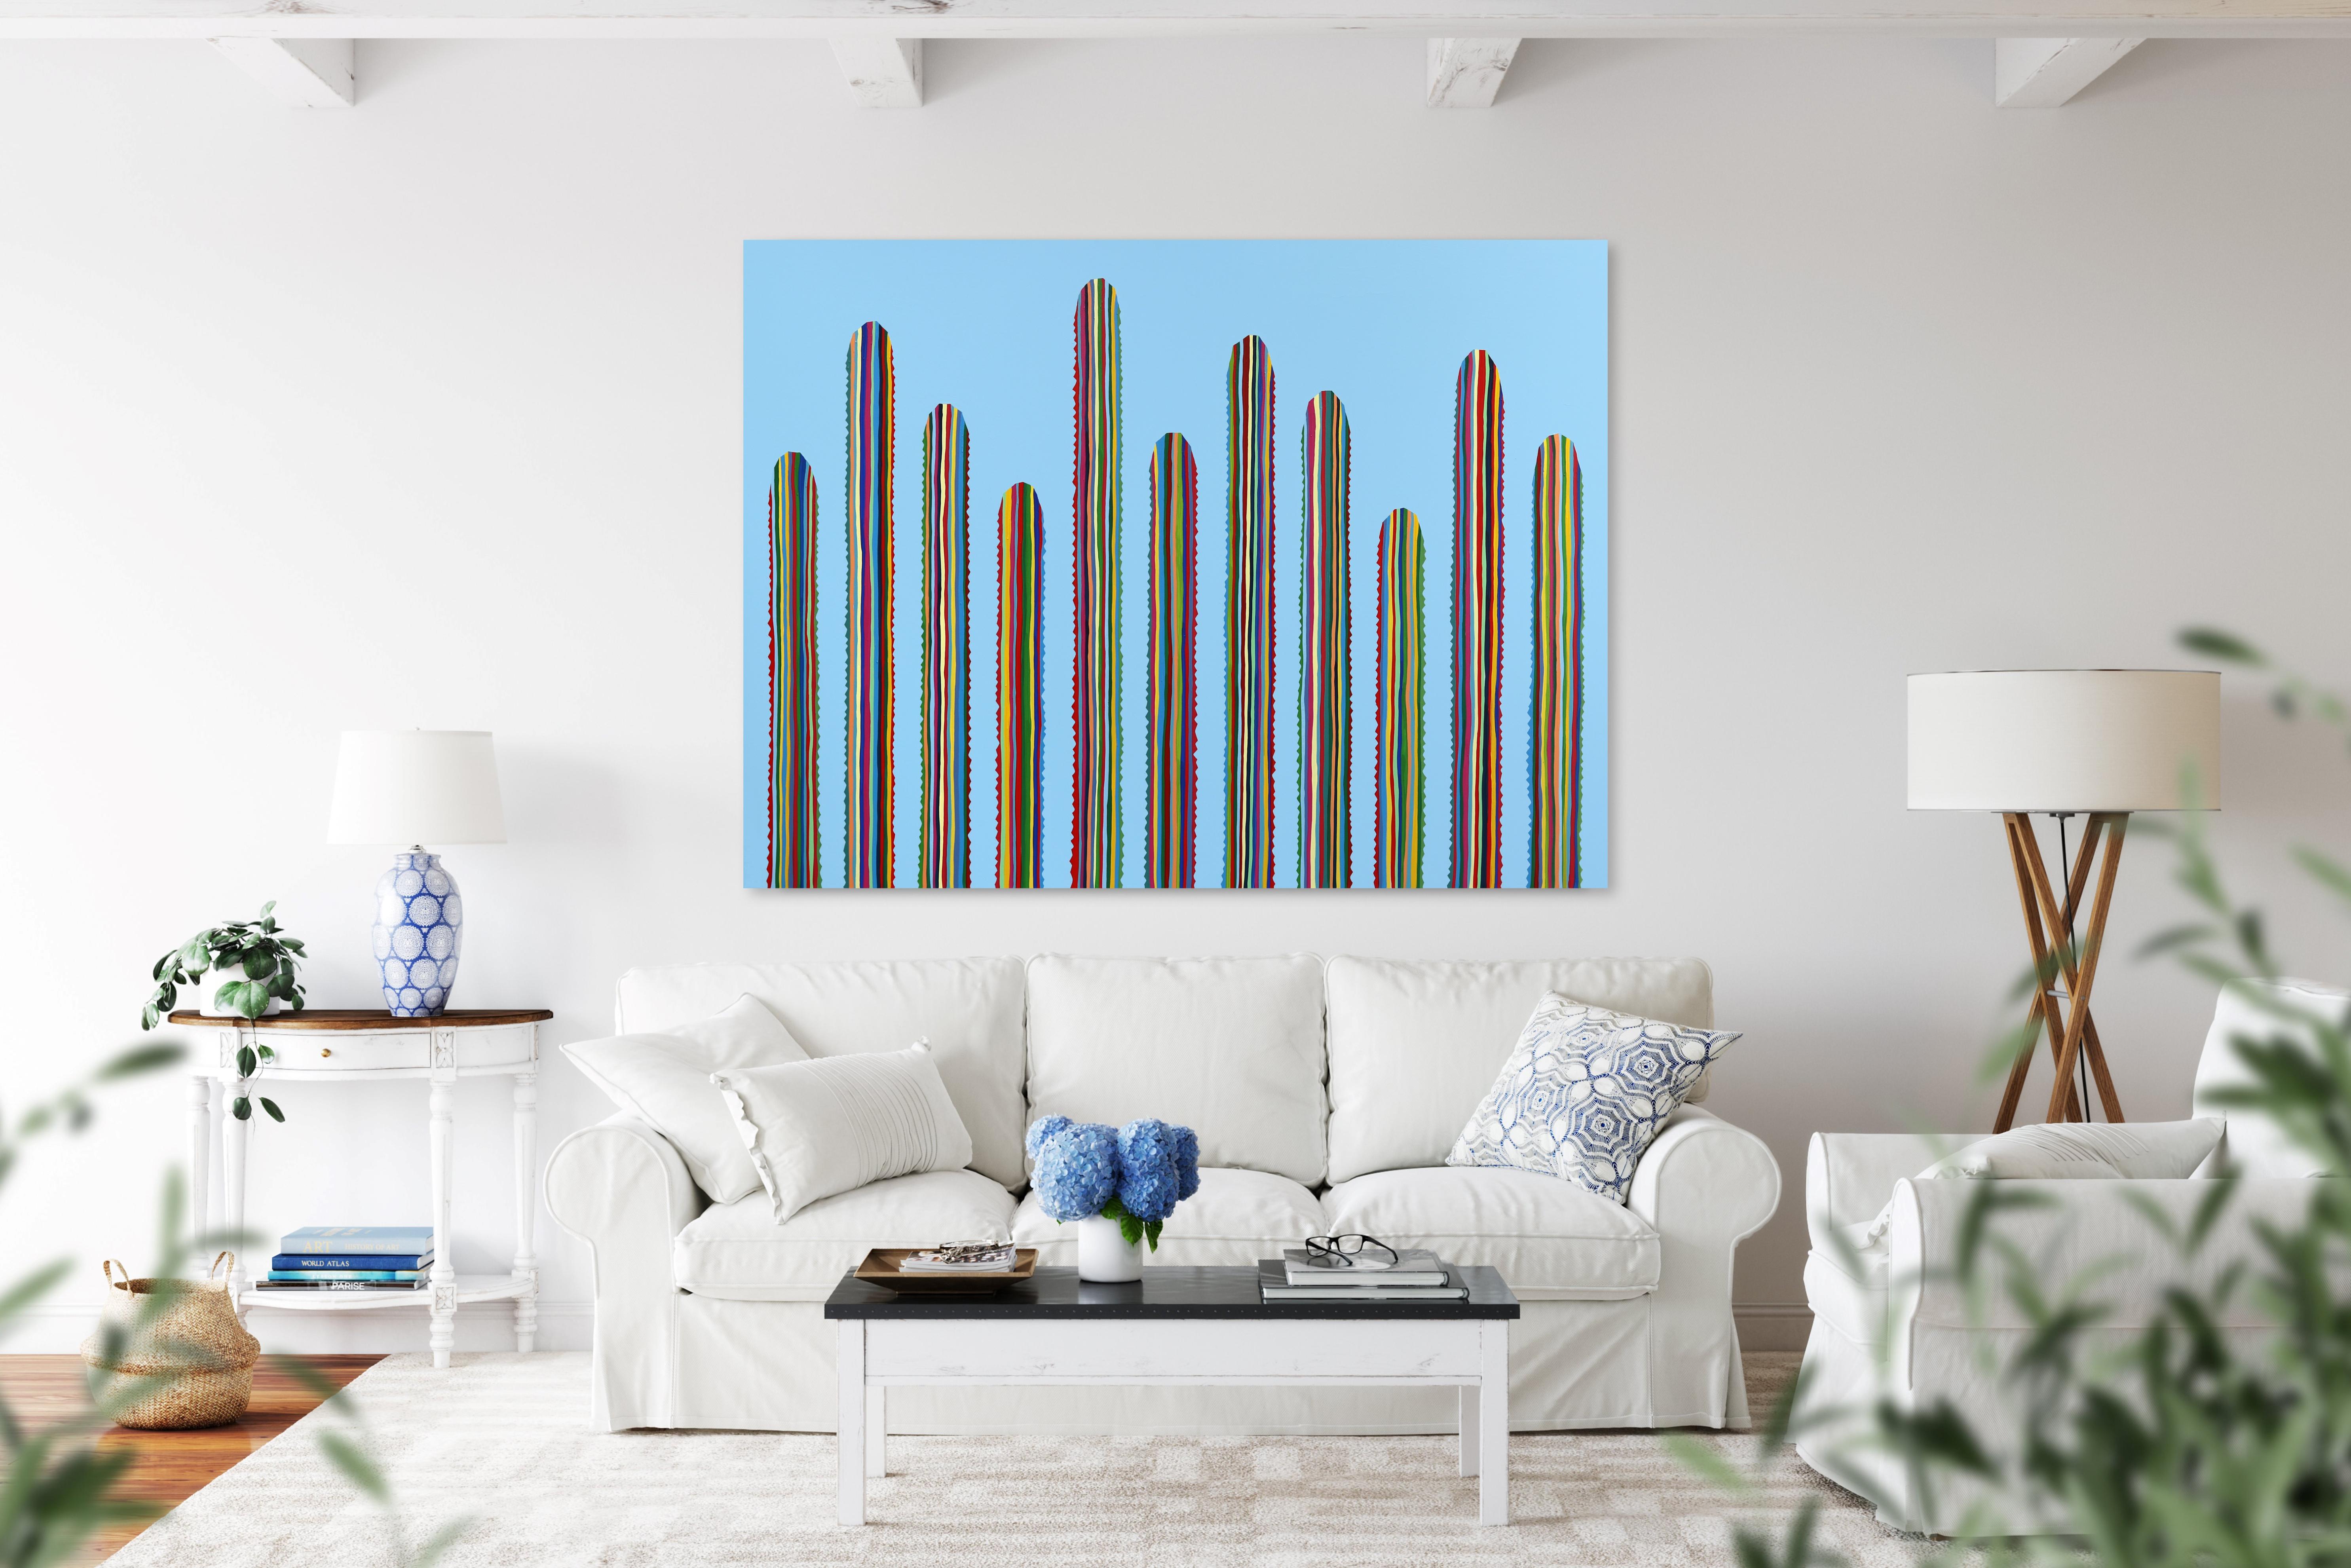 Rainbow Cacti - Painting by Will Beger